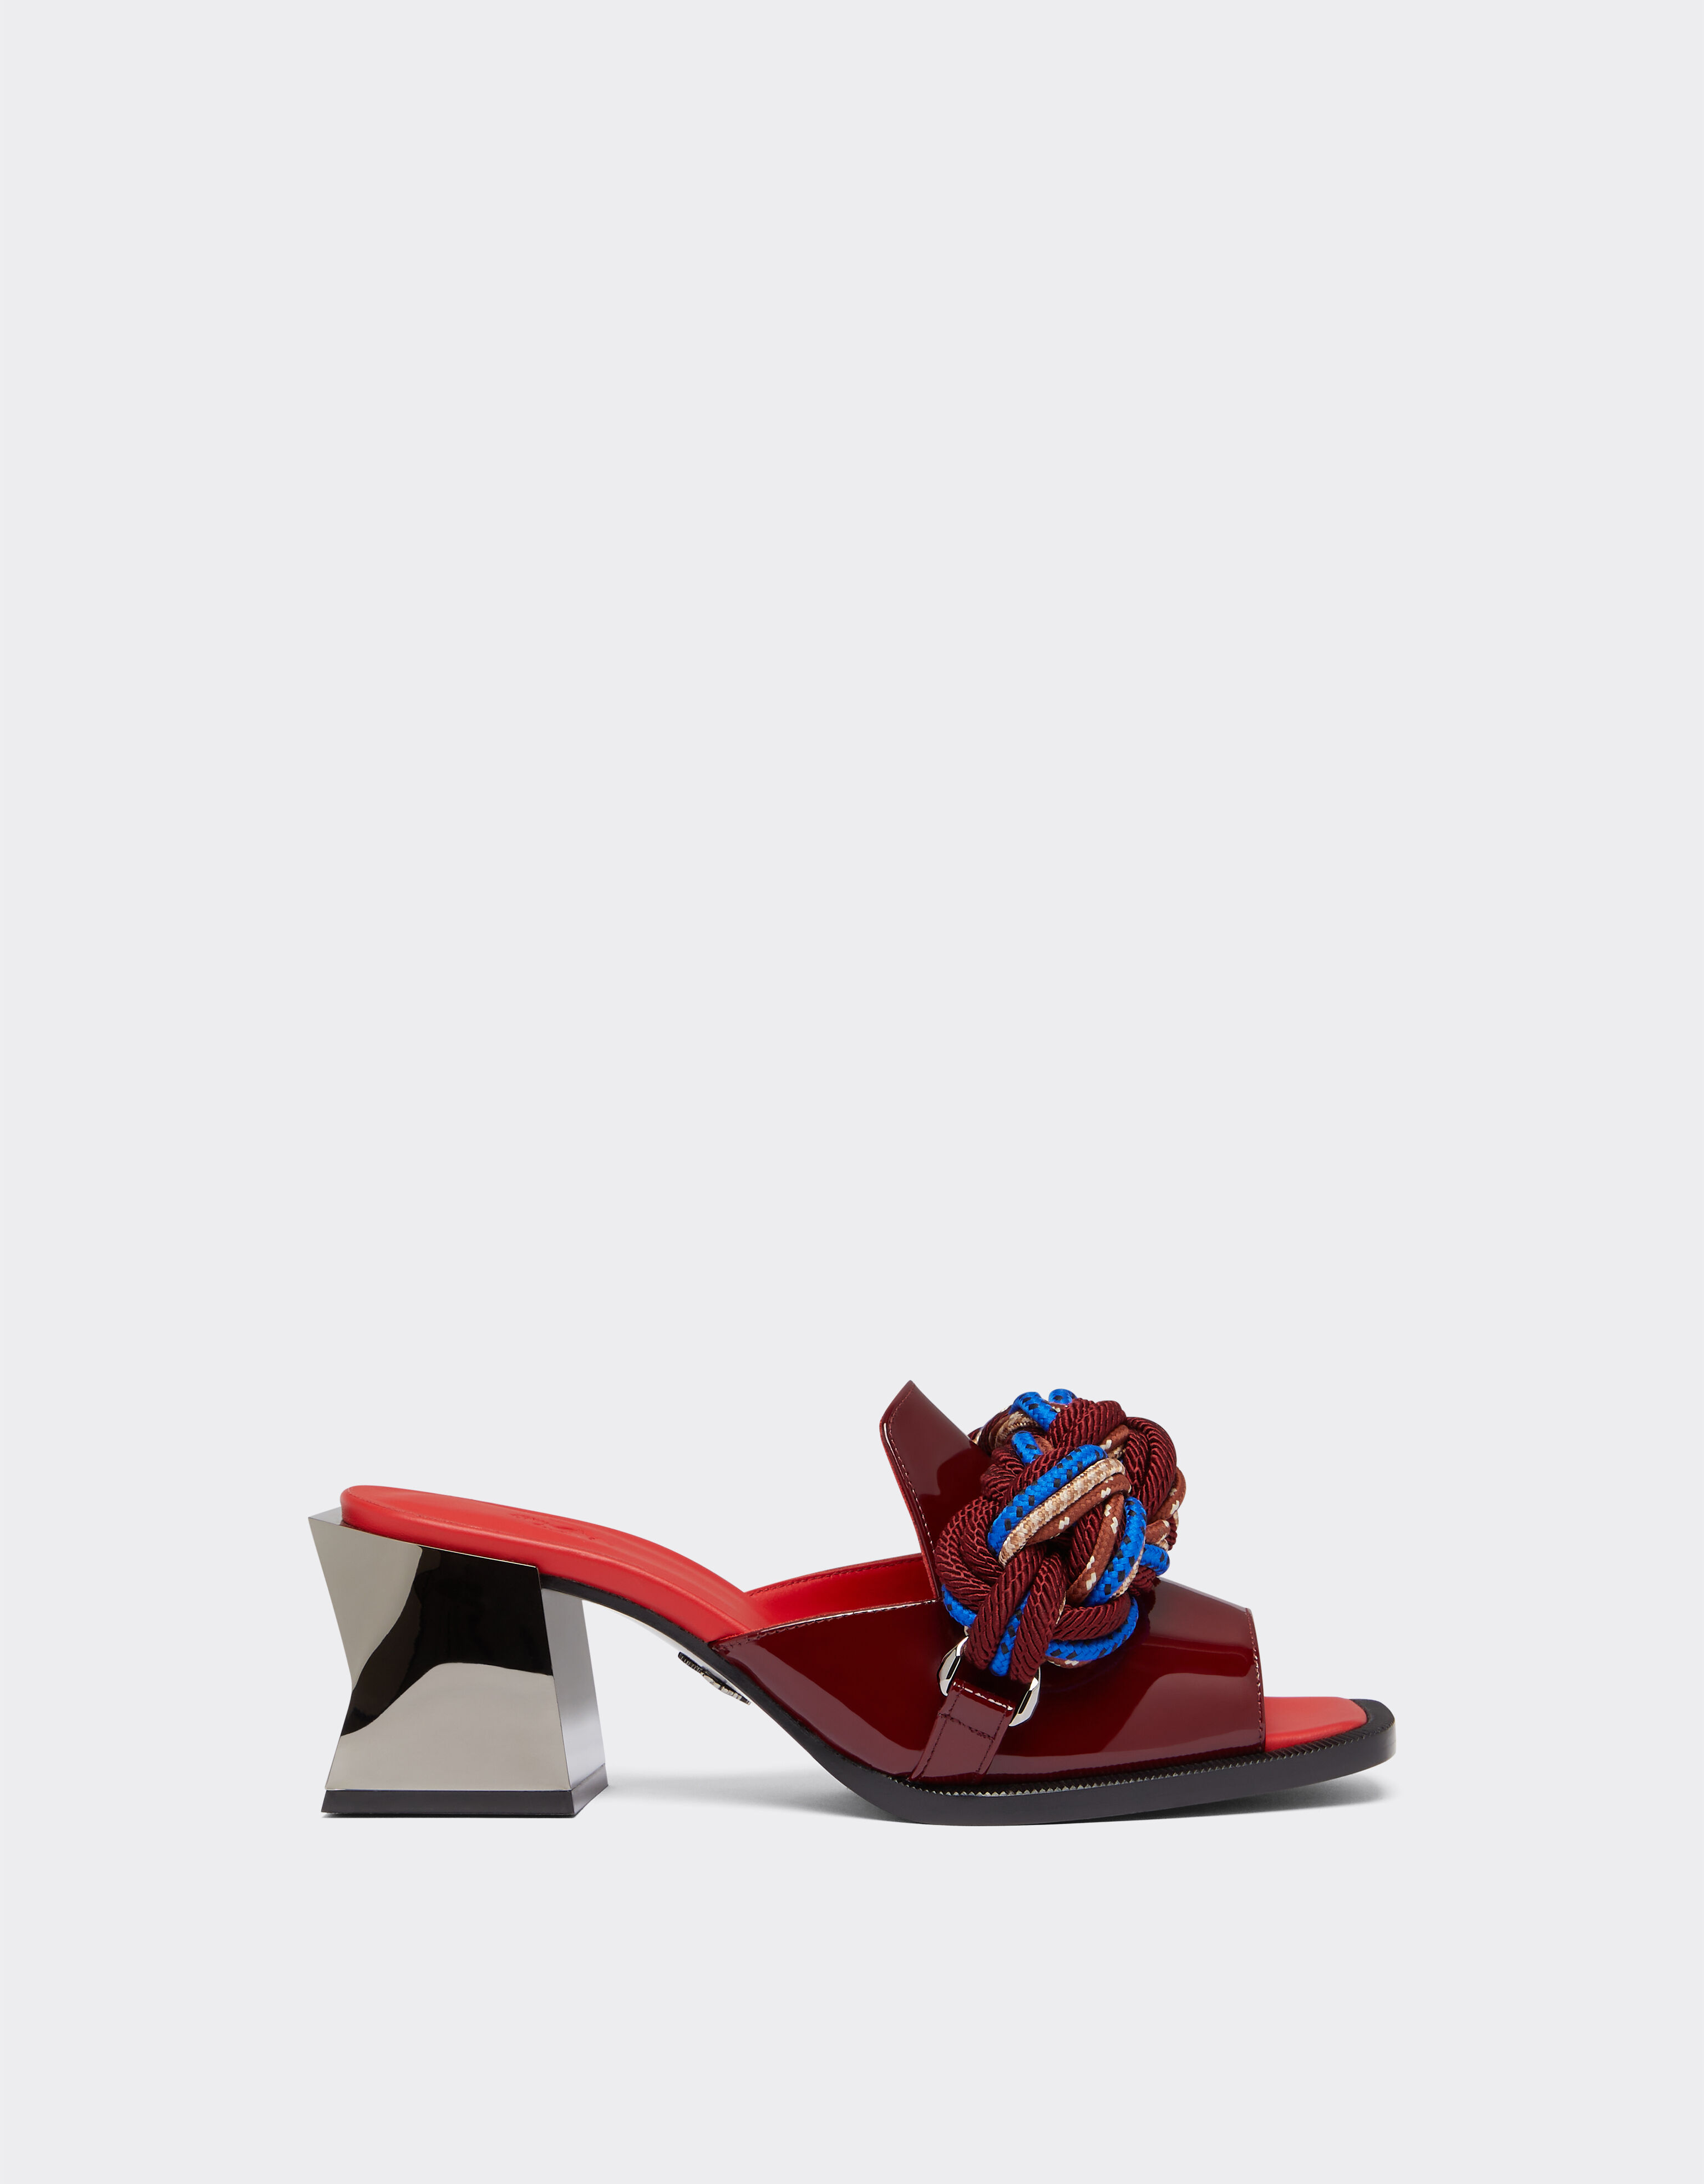 Ferrari Open-toe mules in patent leather with scoubidou detail Ingrid 20684f